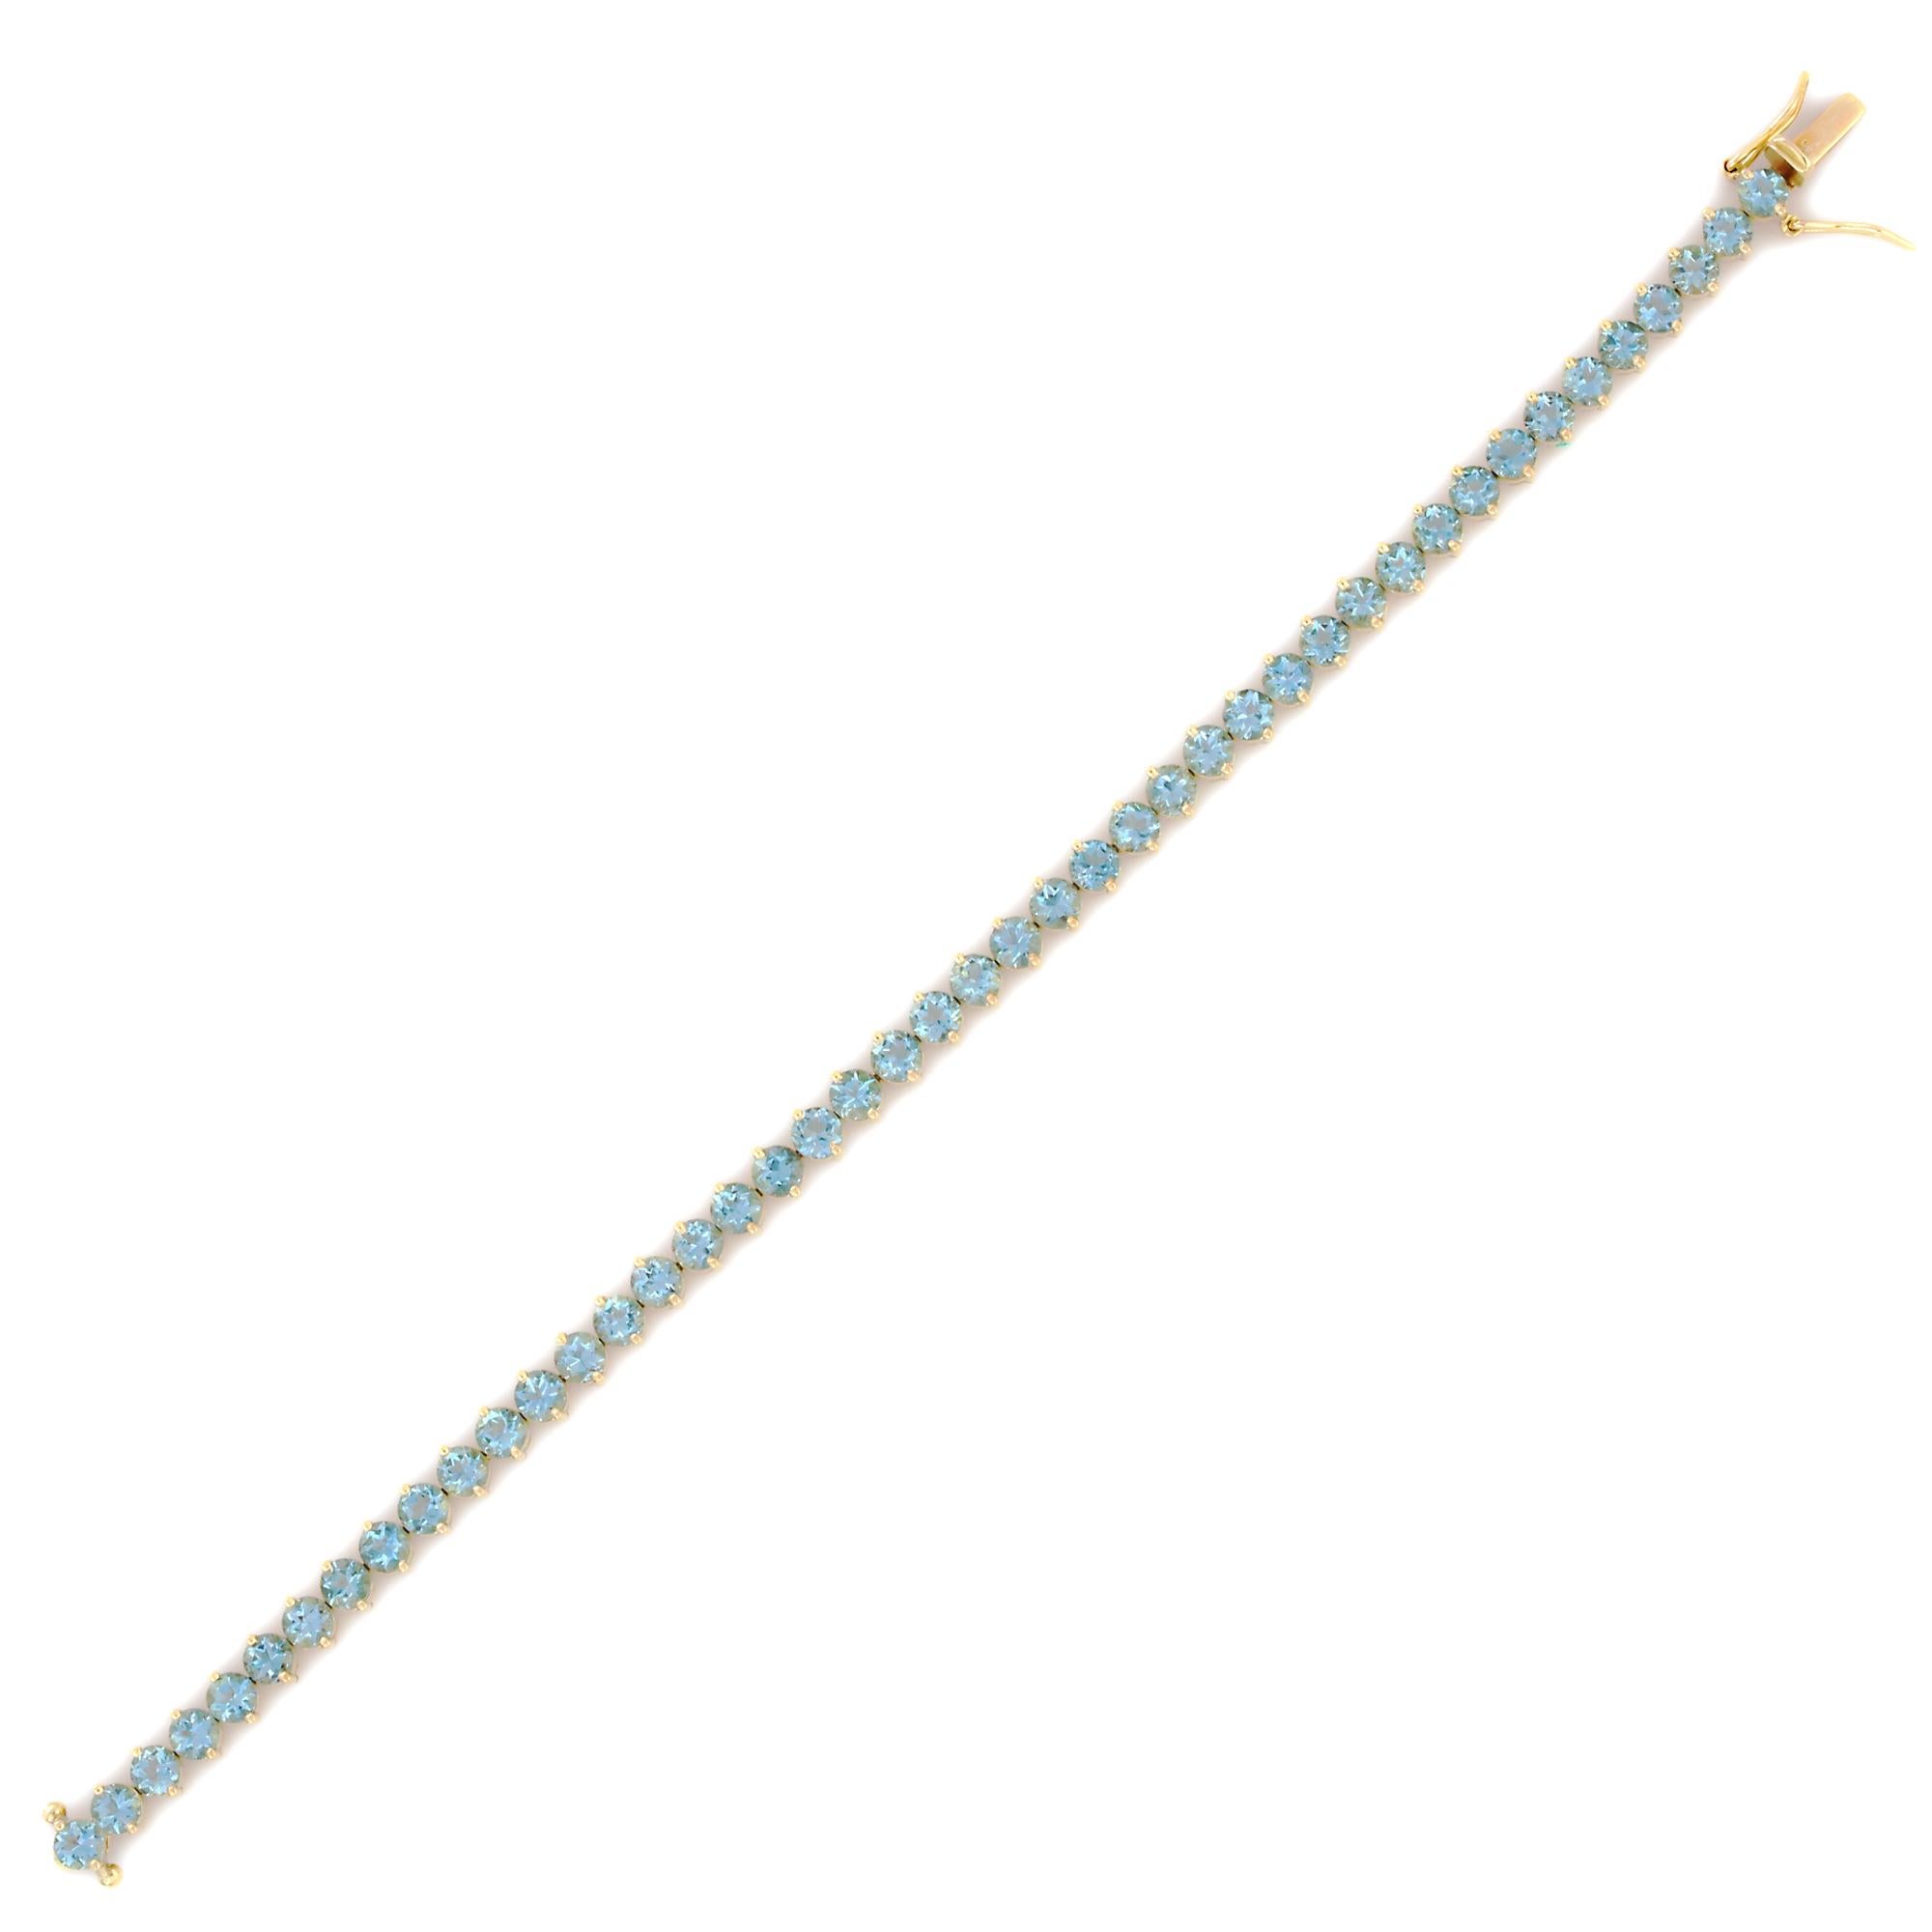 Aquamarine bracelet in 18K Gold. It has a perfect round cut gemstone to make you stand out on any occasion or an event. 
A tennis bracelet is an essential piece of jewelry when it comes to your wedding day. The sleek and elegant style complements